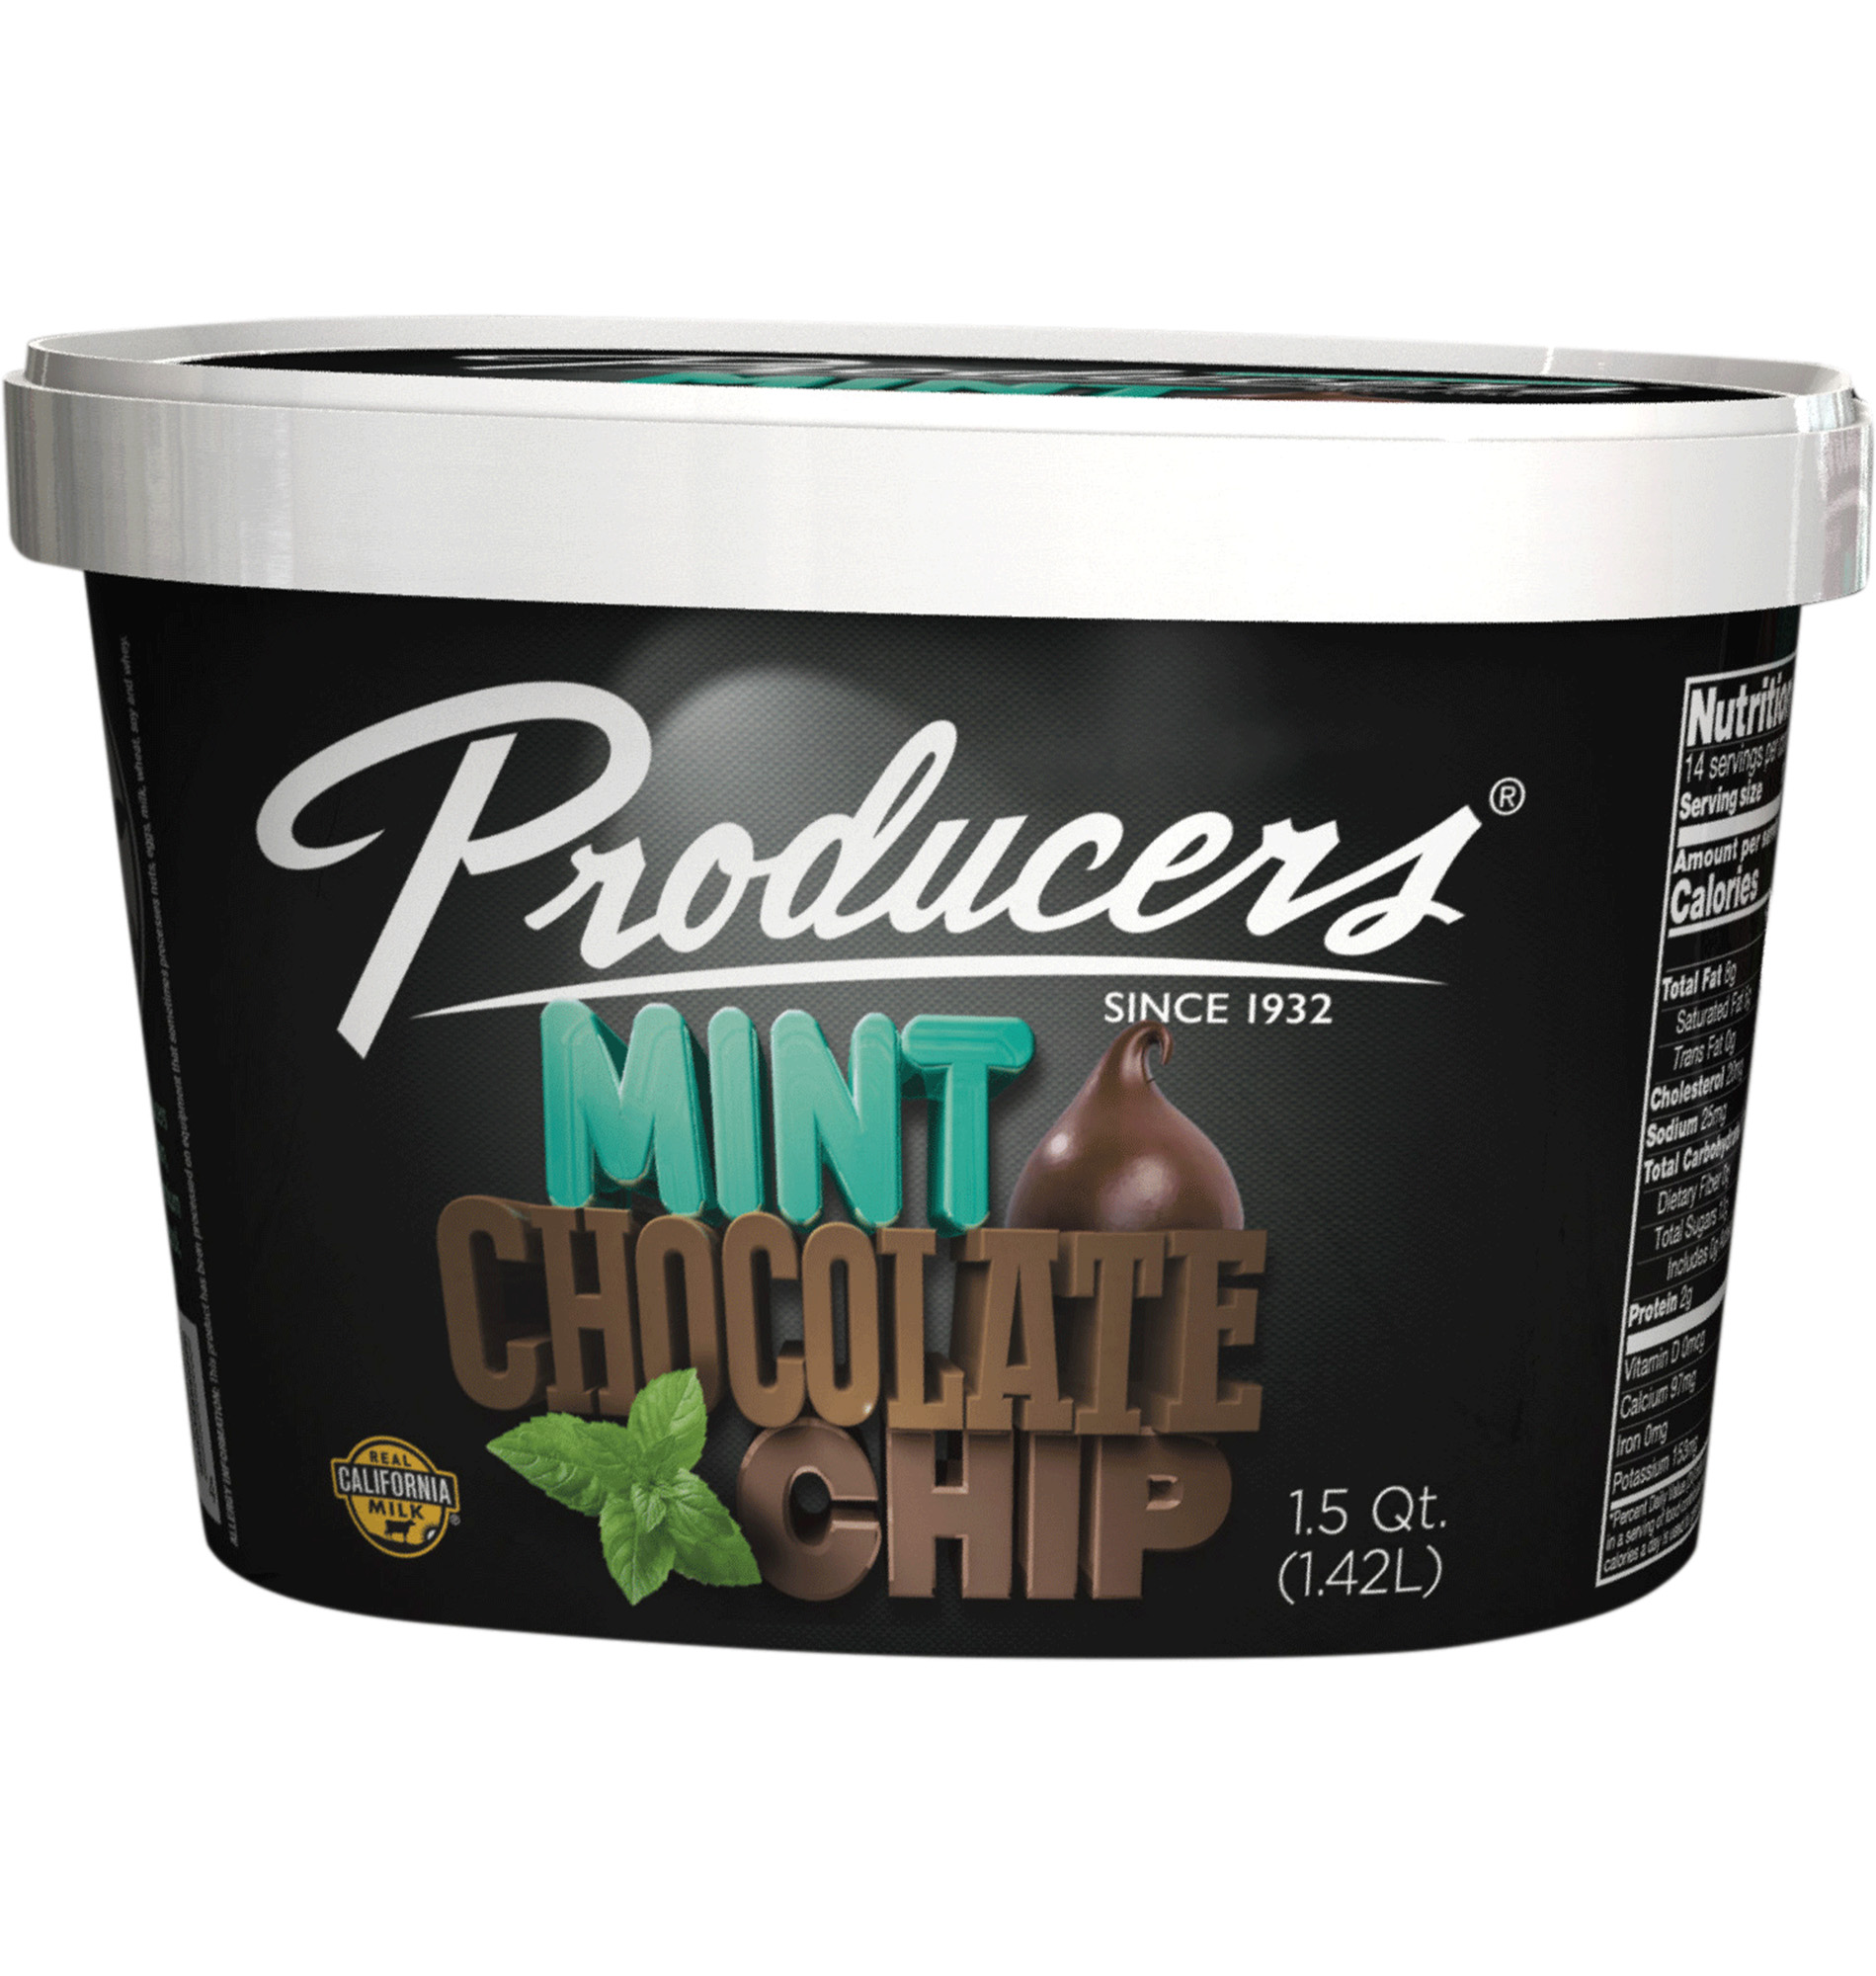 Mint Chocolate Chip Producers Dairy Ice Cream Container